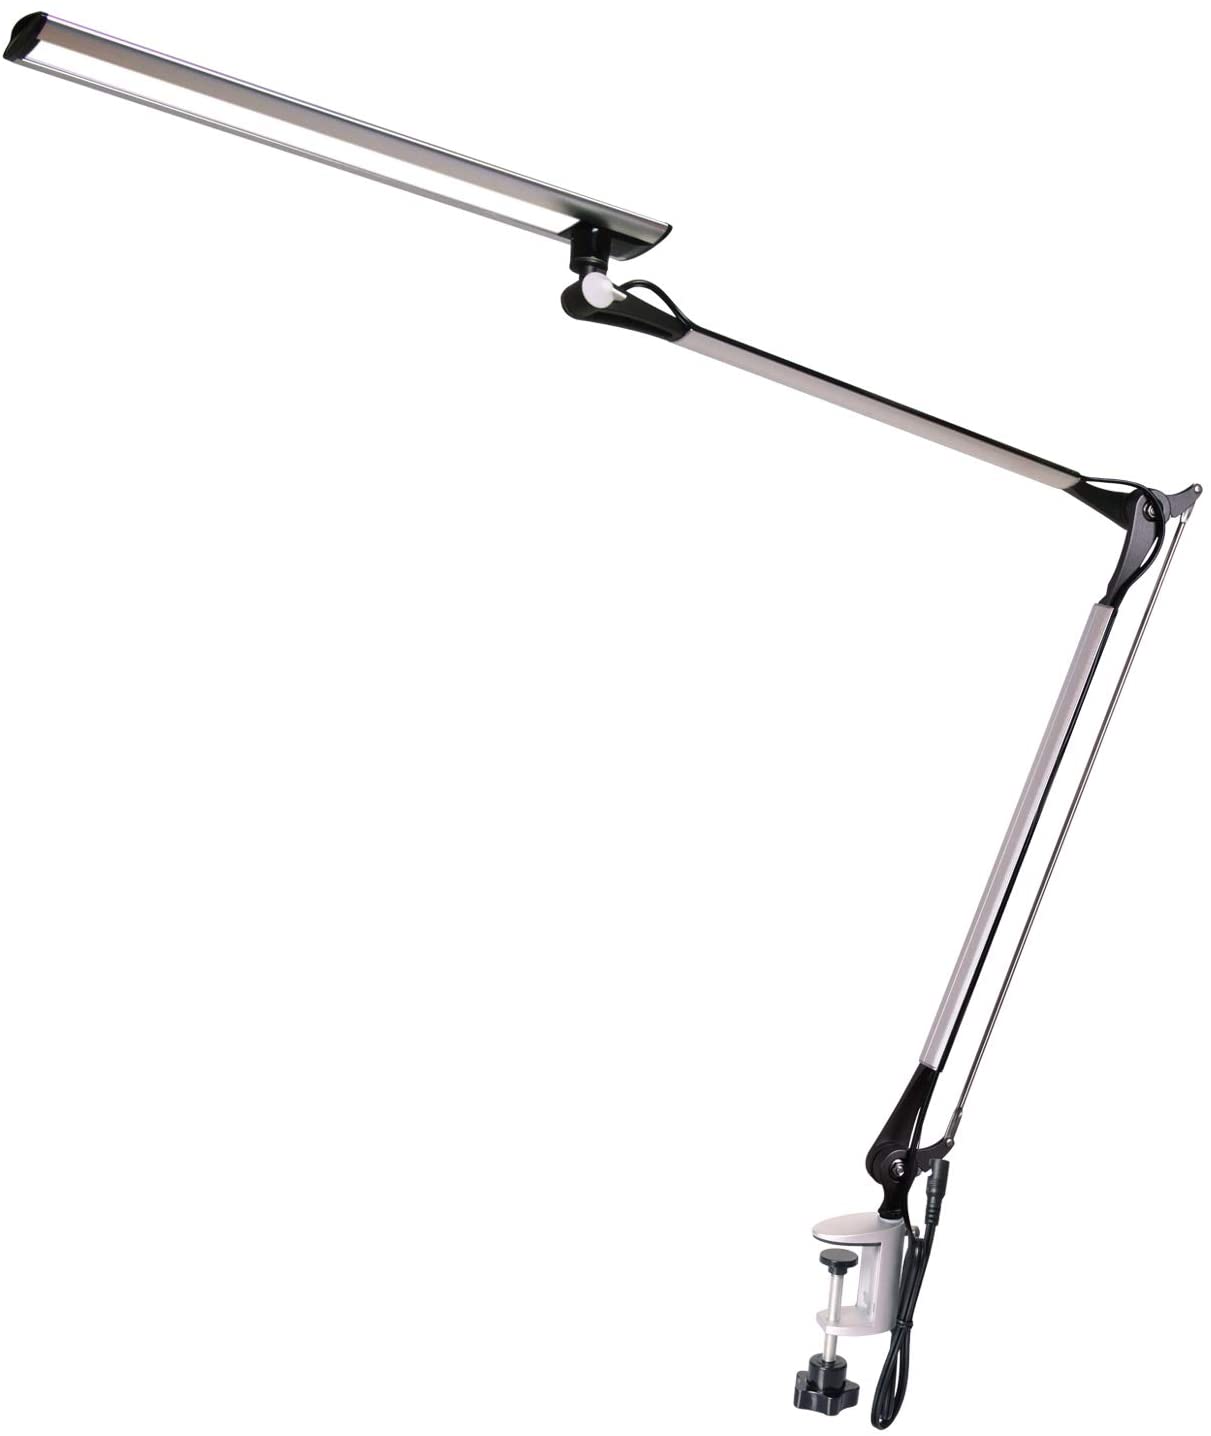 Amzrozky Drafting Table Lamp